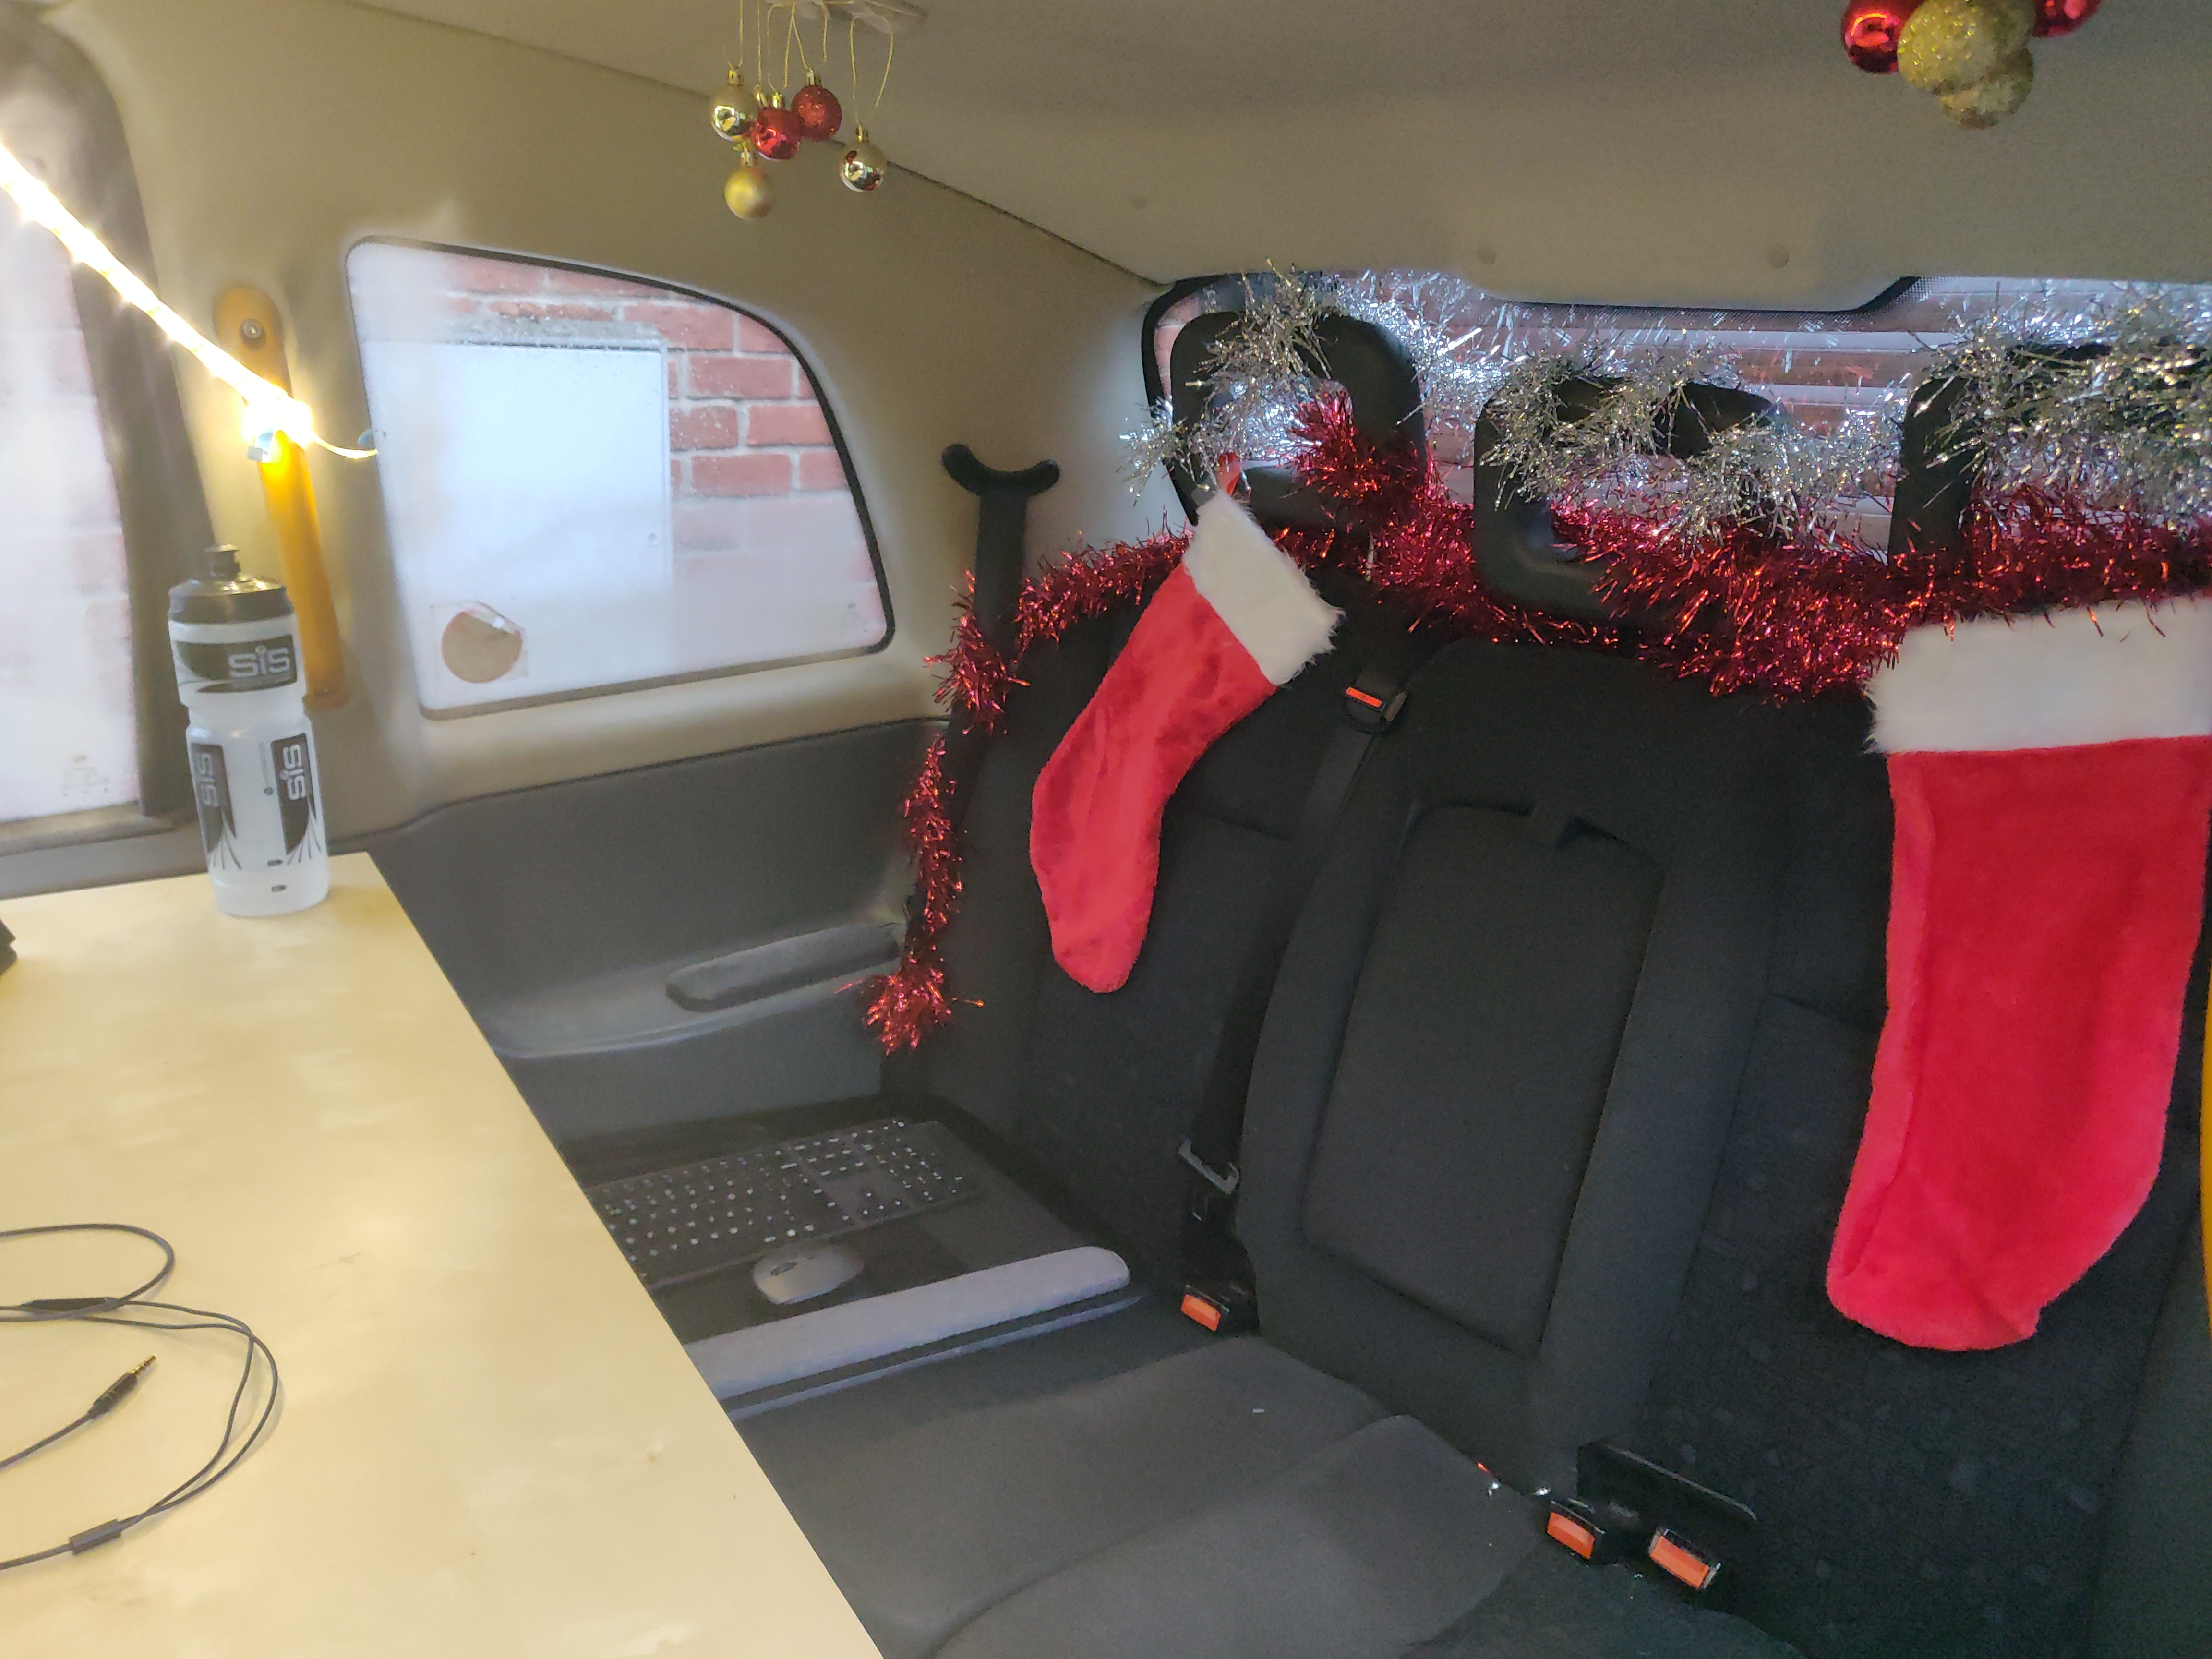 Photo taken from the open passenger door of the taxi, showing Christmas decorations in the back